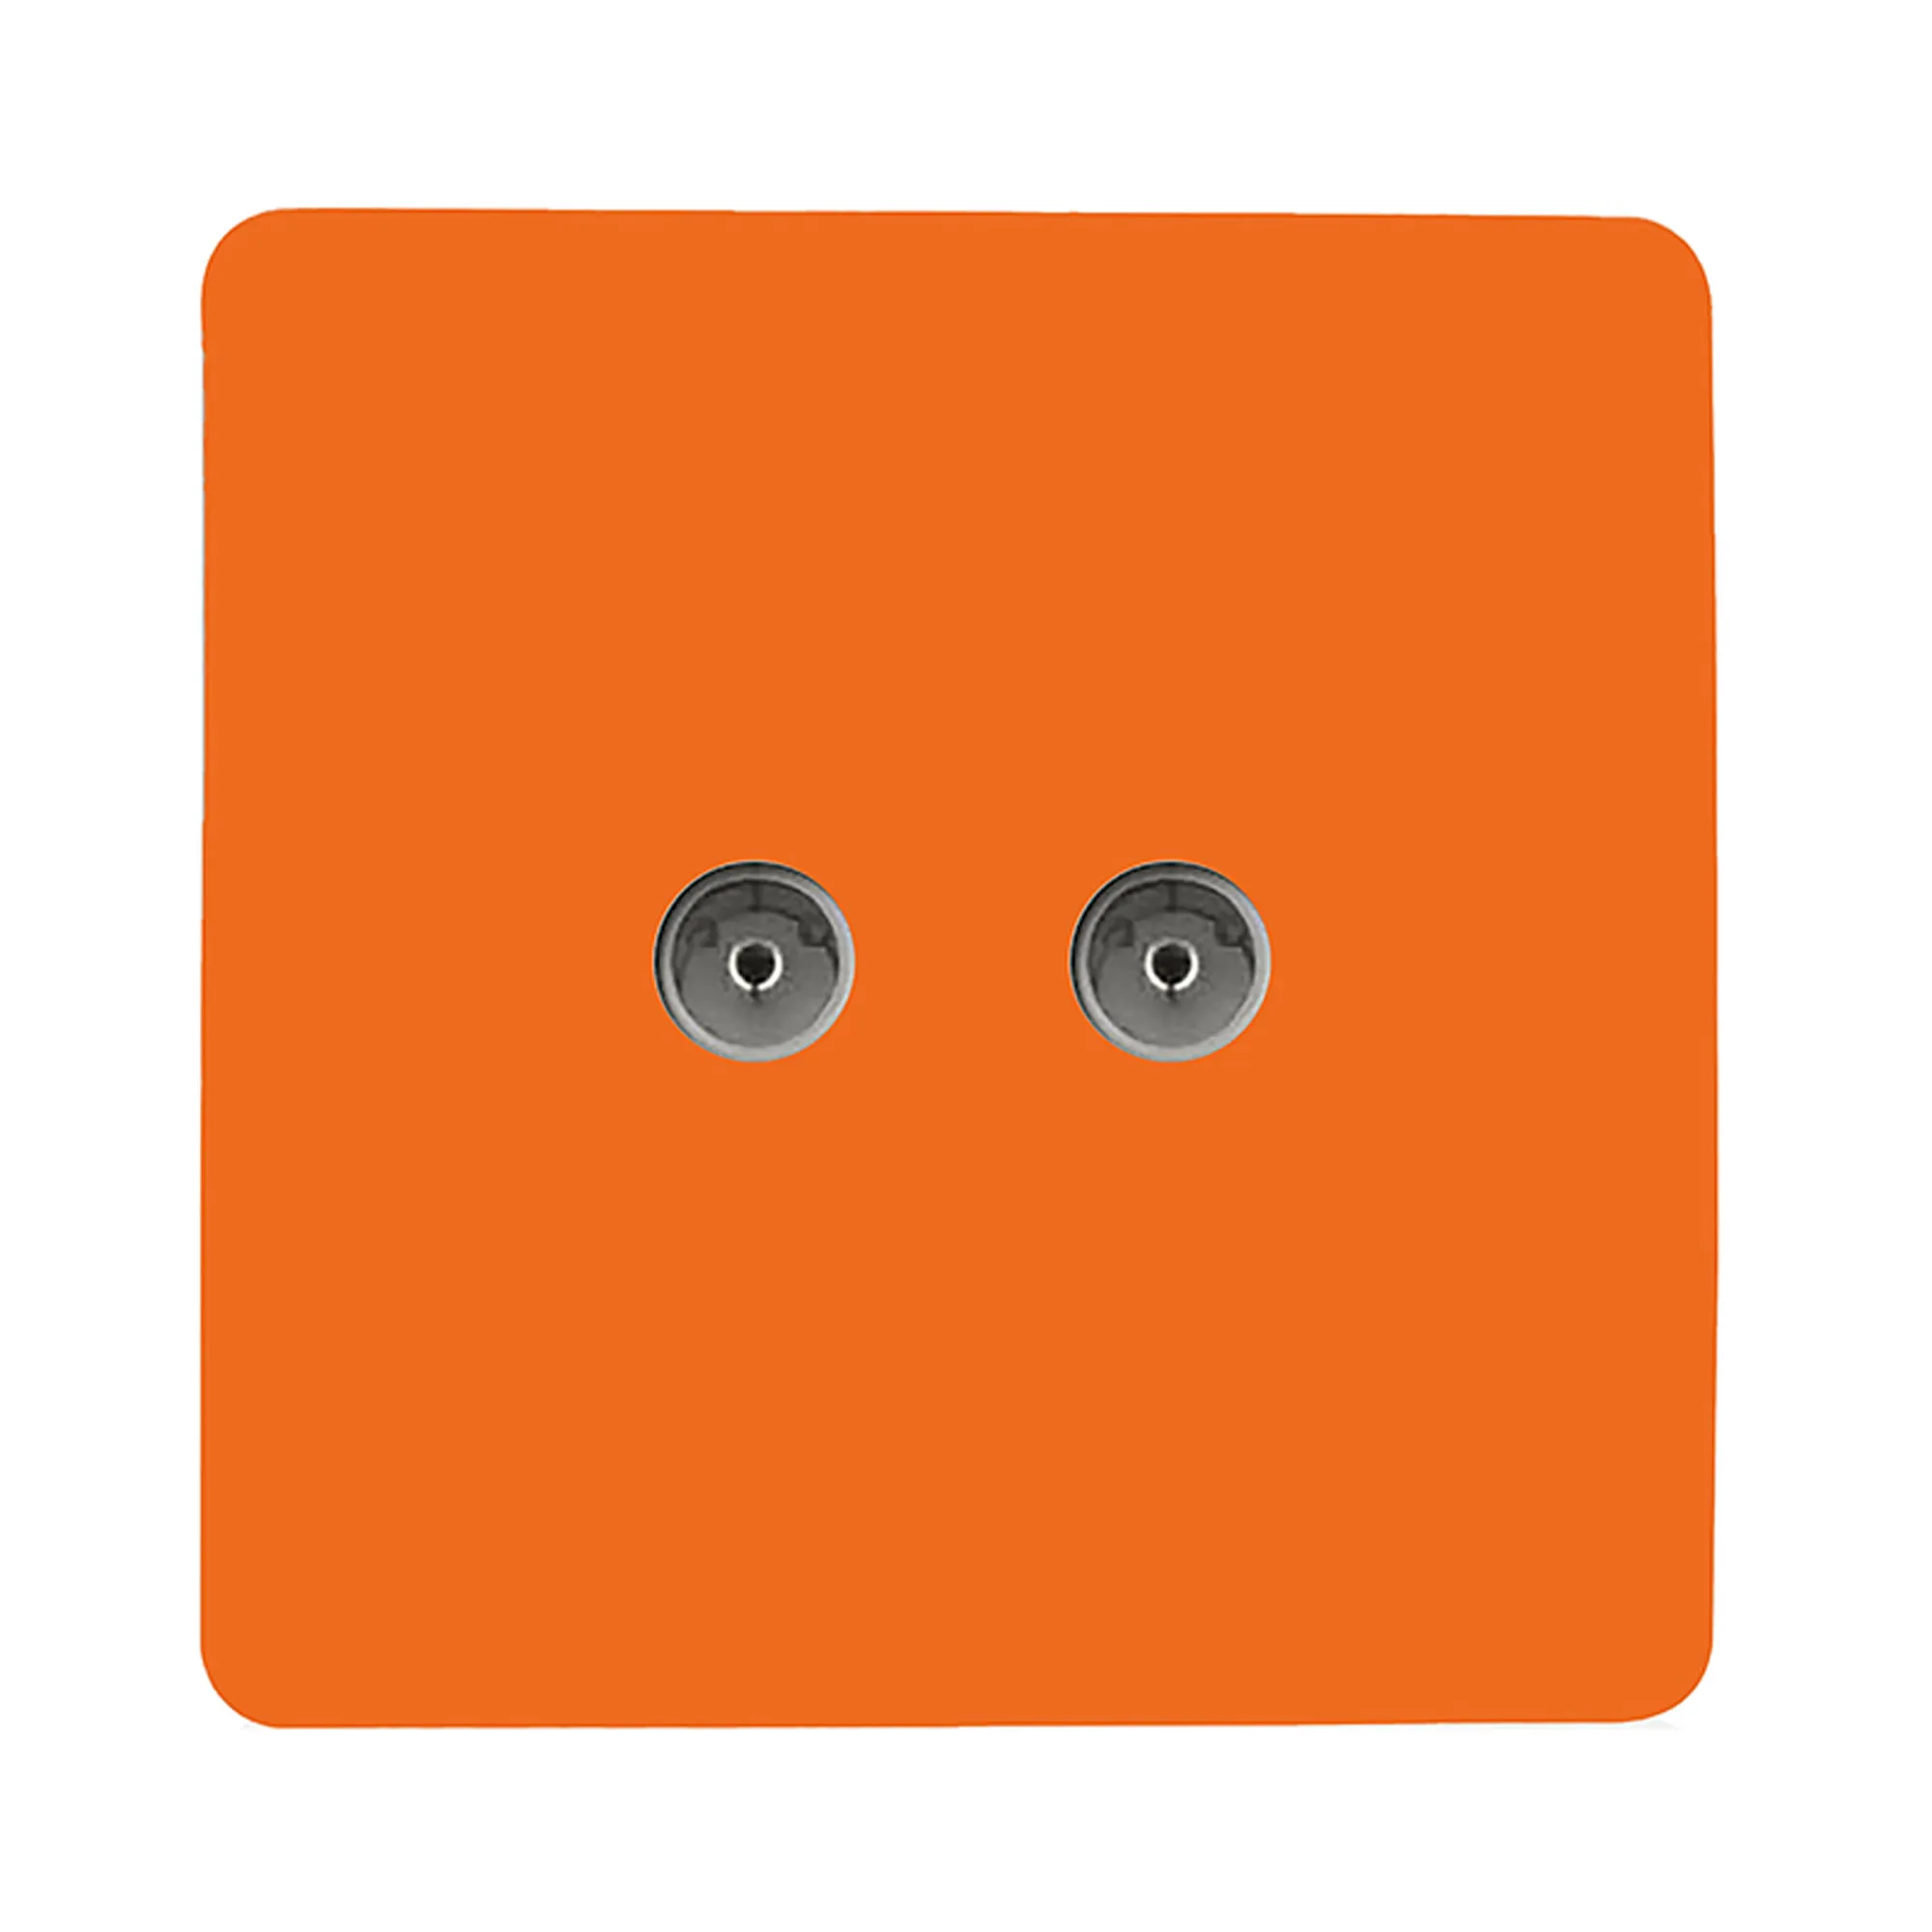 Twin TV Co-Axial Outlet Orange